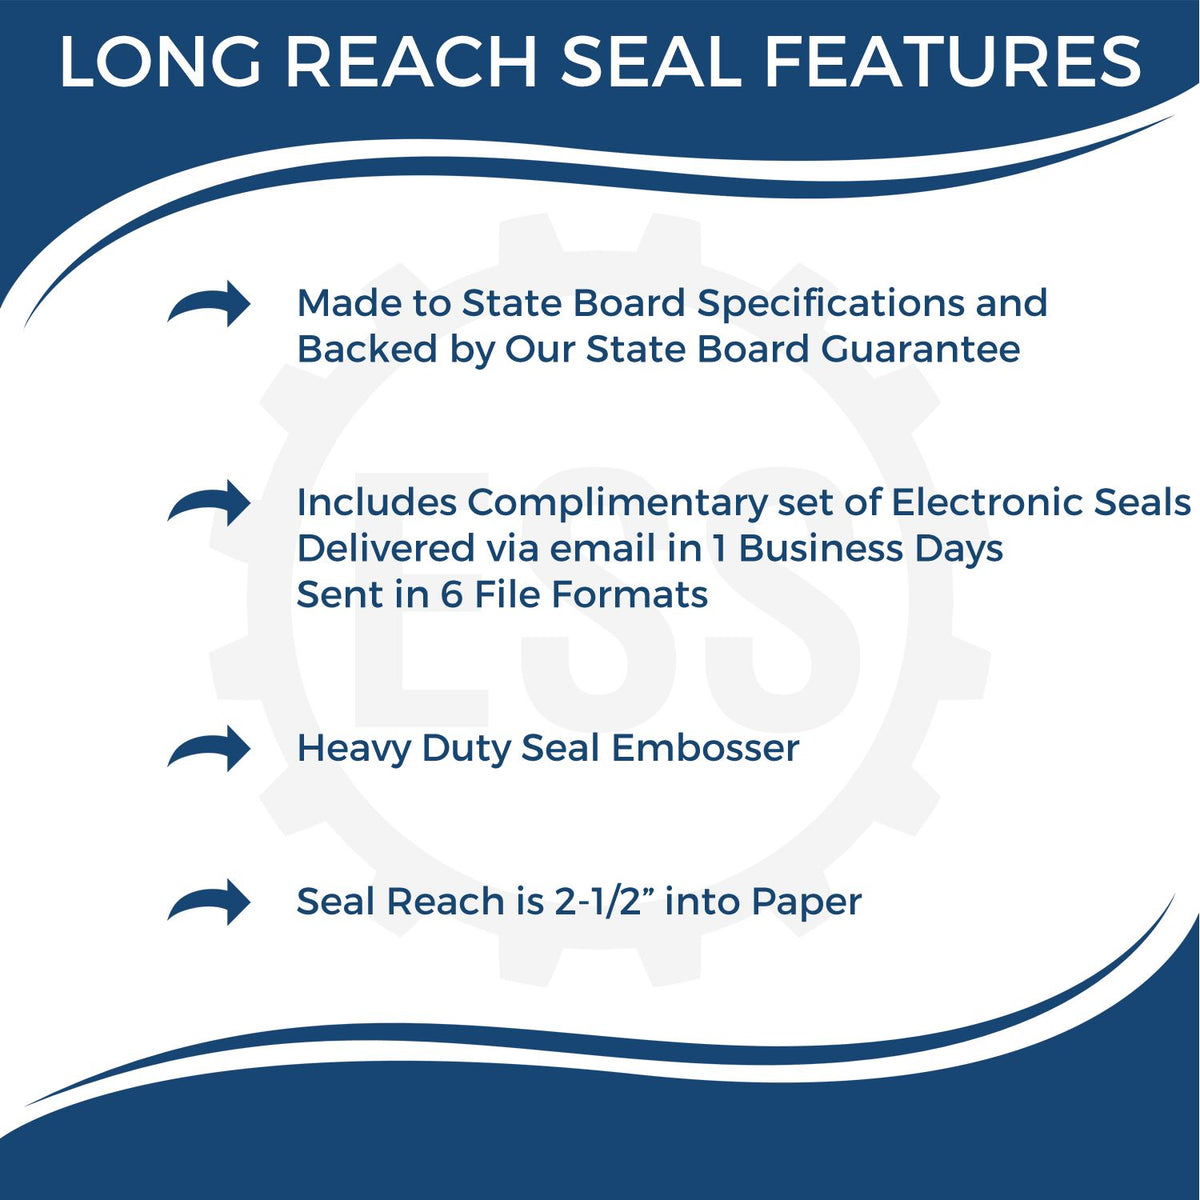 A picture of an infographic highlighting the selling points for the Long Reach West Virginia PE Seal